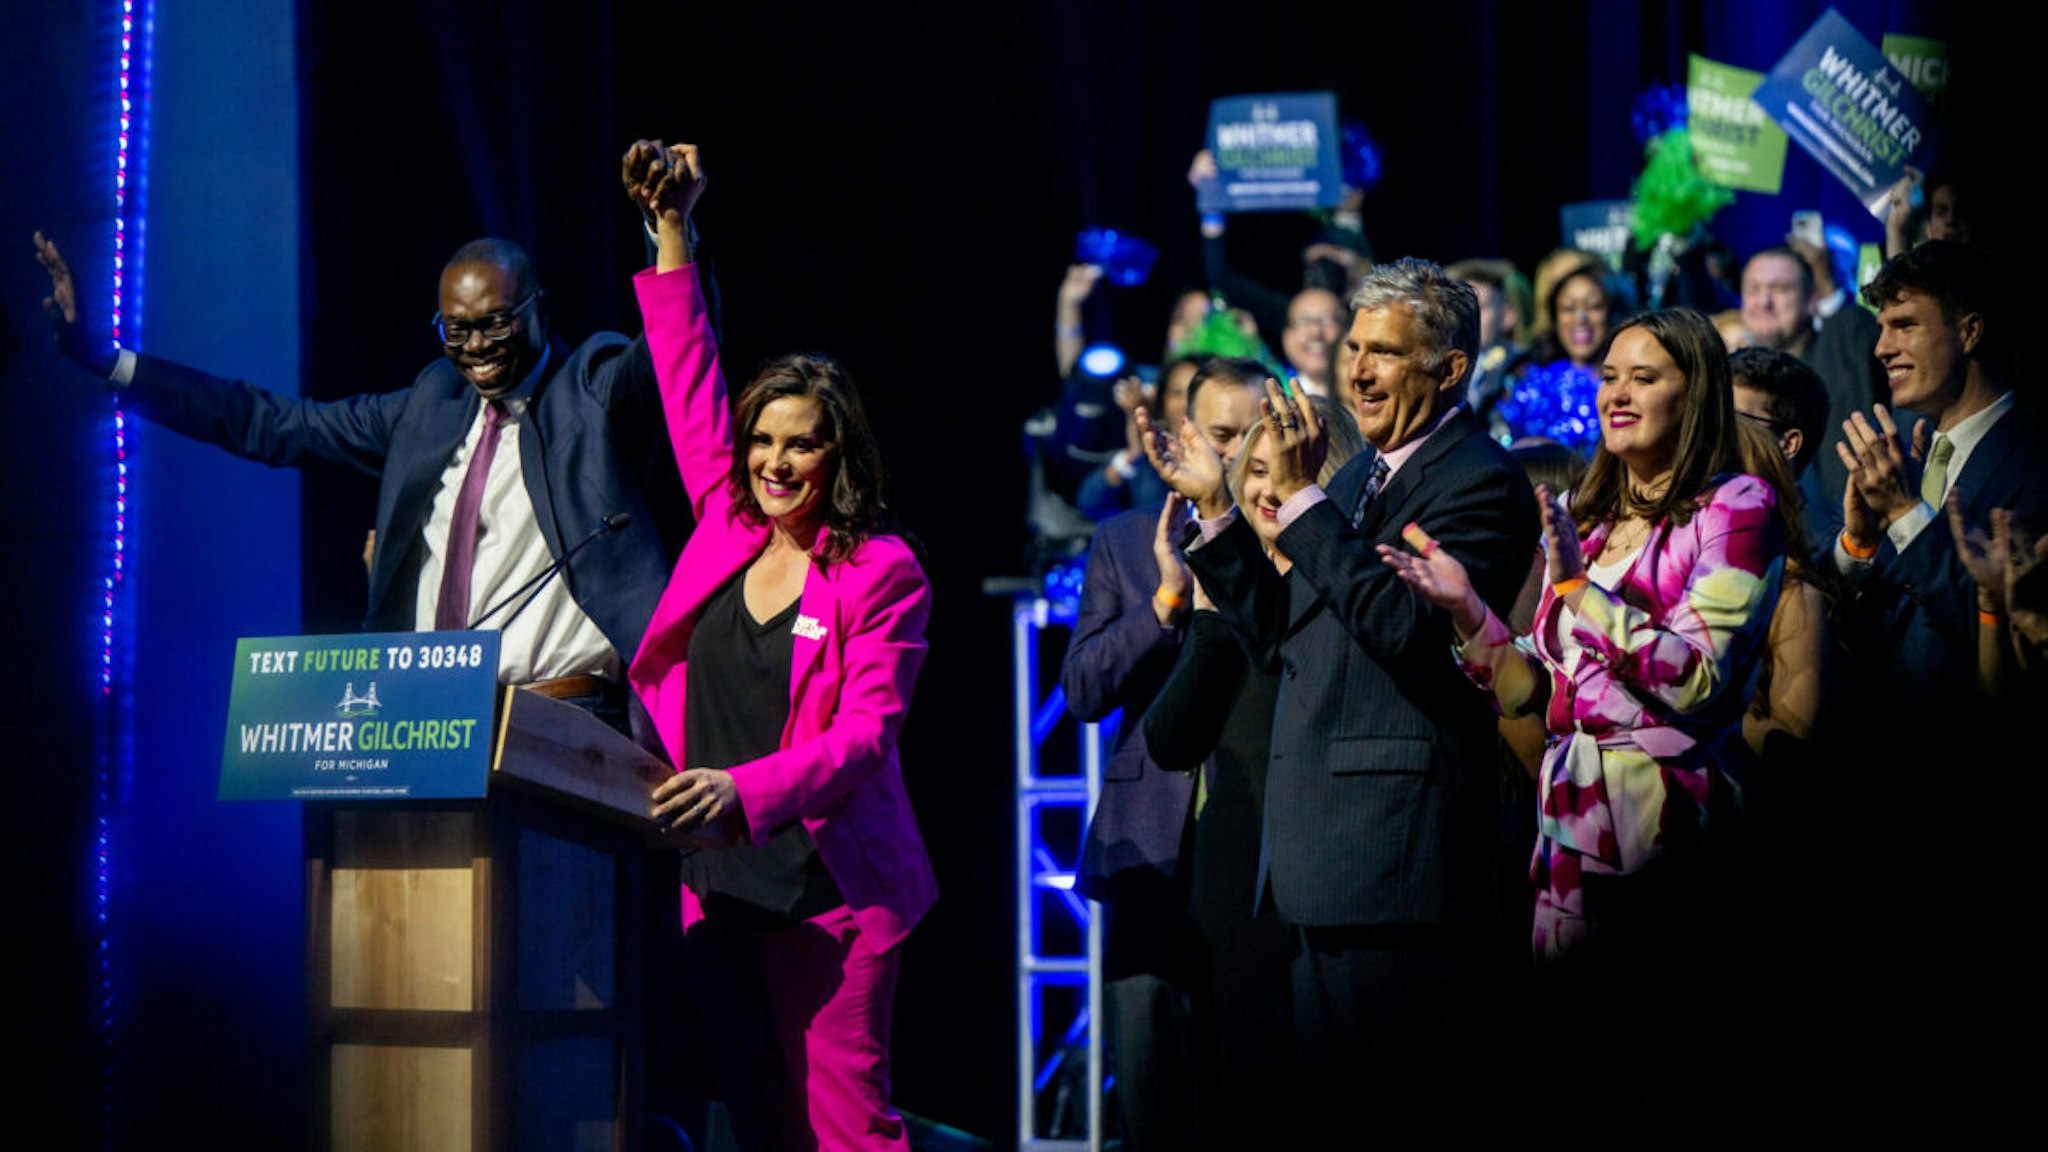 Lt. Gov. Garlin Gilchrist II and Gov. Gretchen Whitmer celebrate during an election night watch party at MotorCity Casino Hotel on November 09, 2022 in Detroit, Michigan. Gov. Whitmer won her race over Republican challenger Tudor Dixon